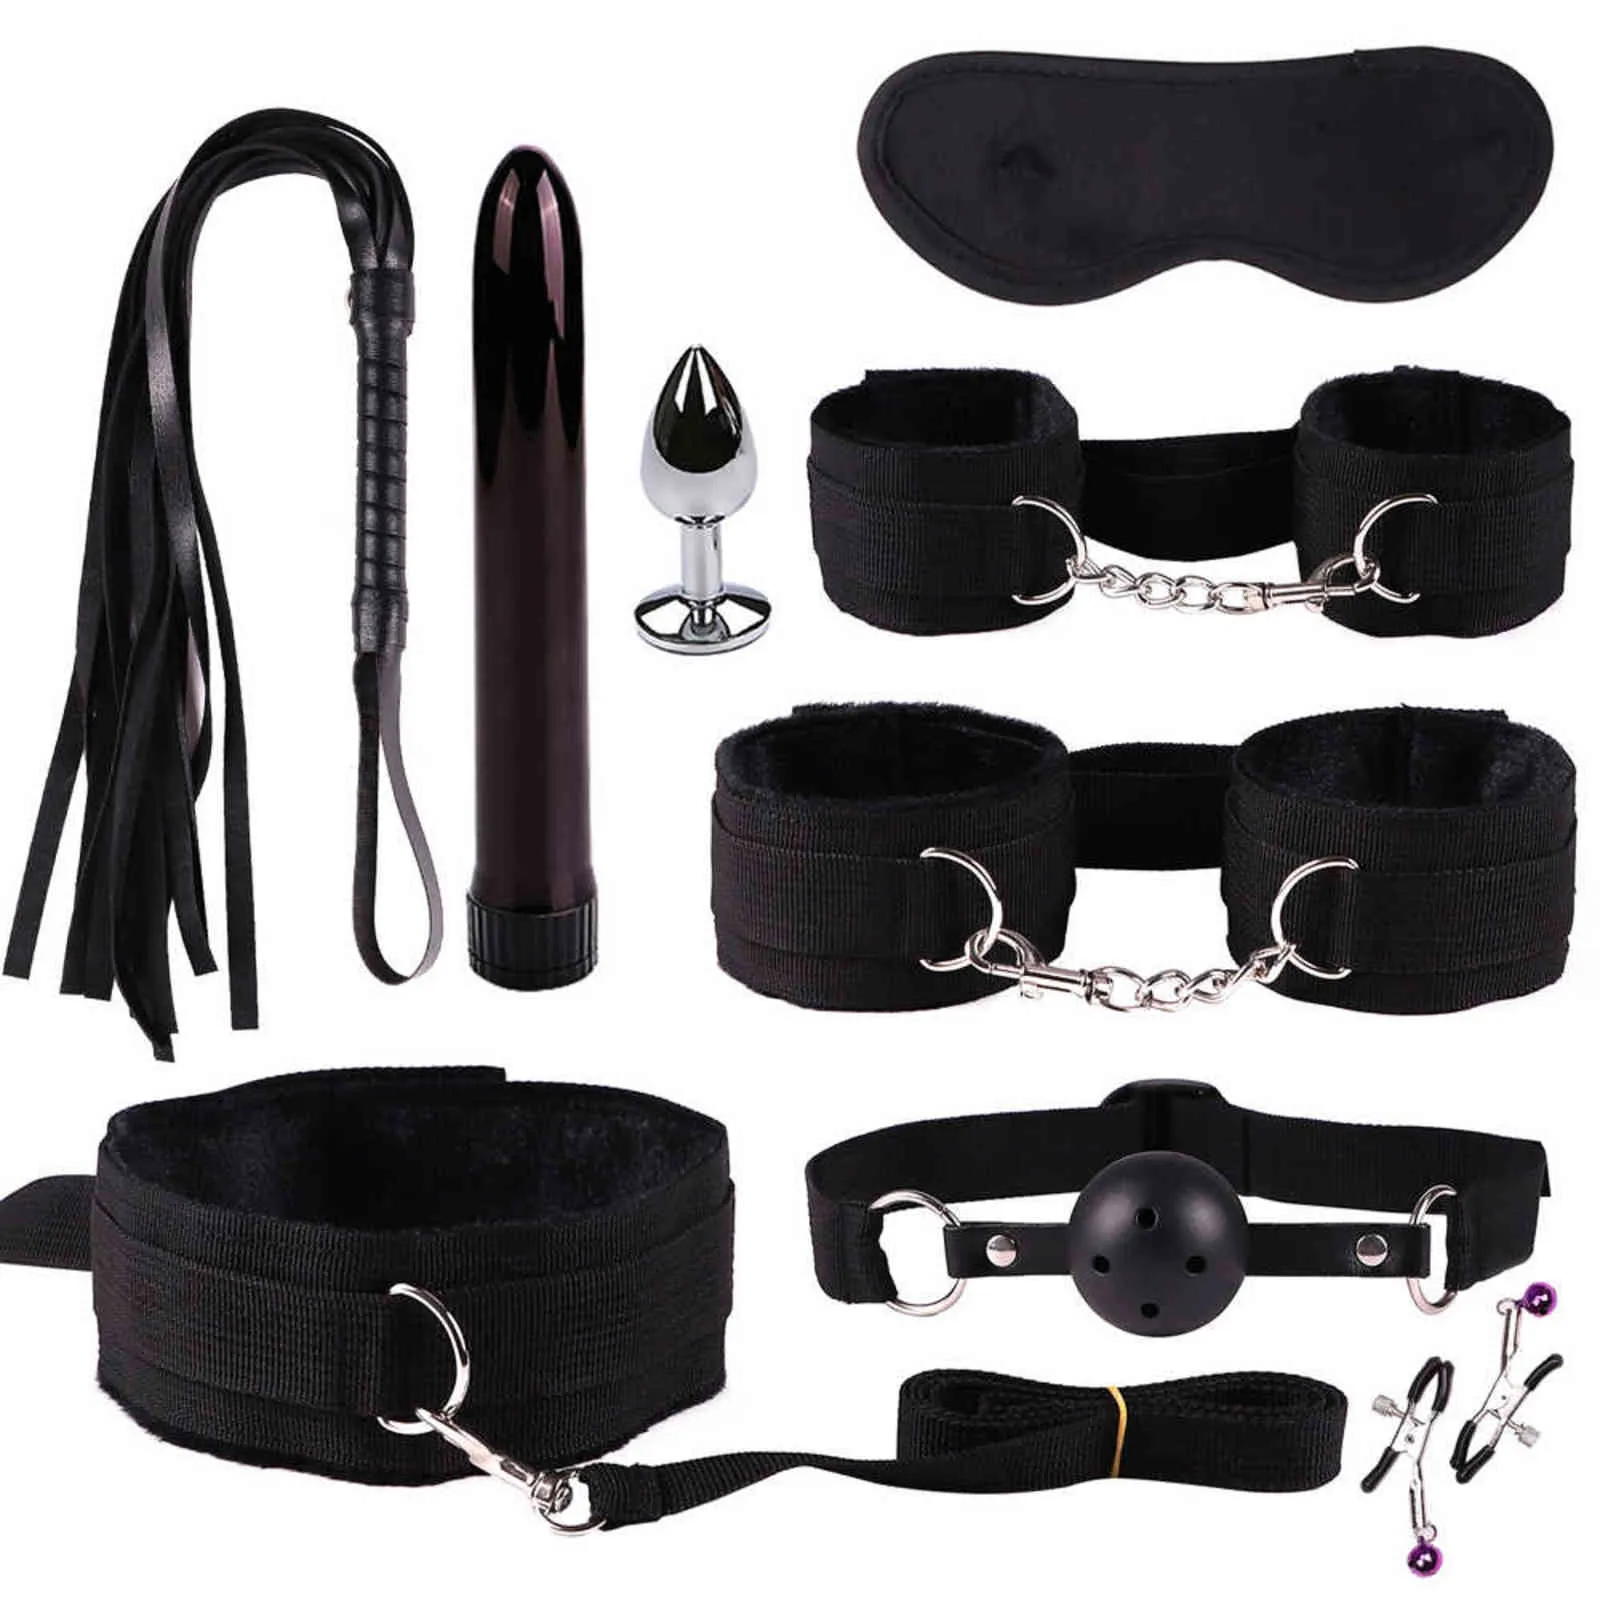 NXY Sm bondage BDSM Sex Toys For Couples Handcuffs Whip Nipples Clip Blindfold Mouth Gag Adult Kit Bondage Toy Flirt Games 1126